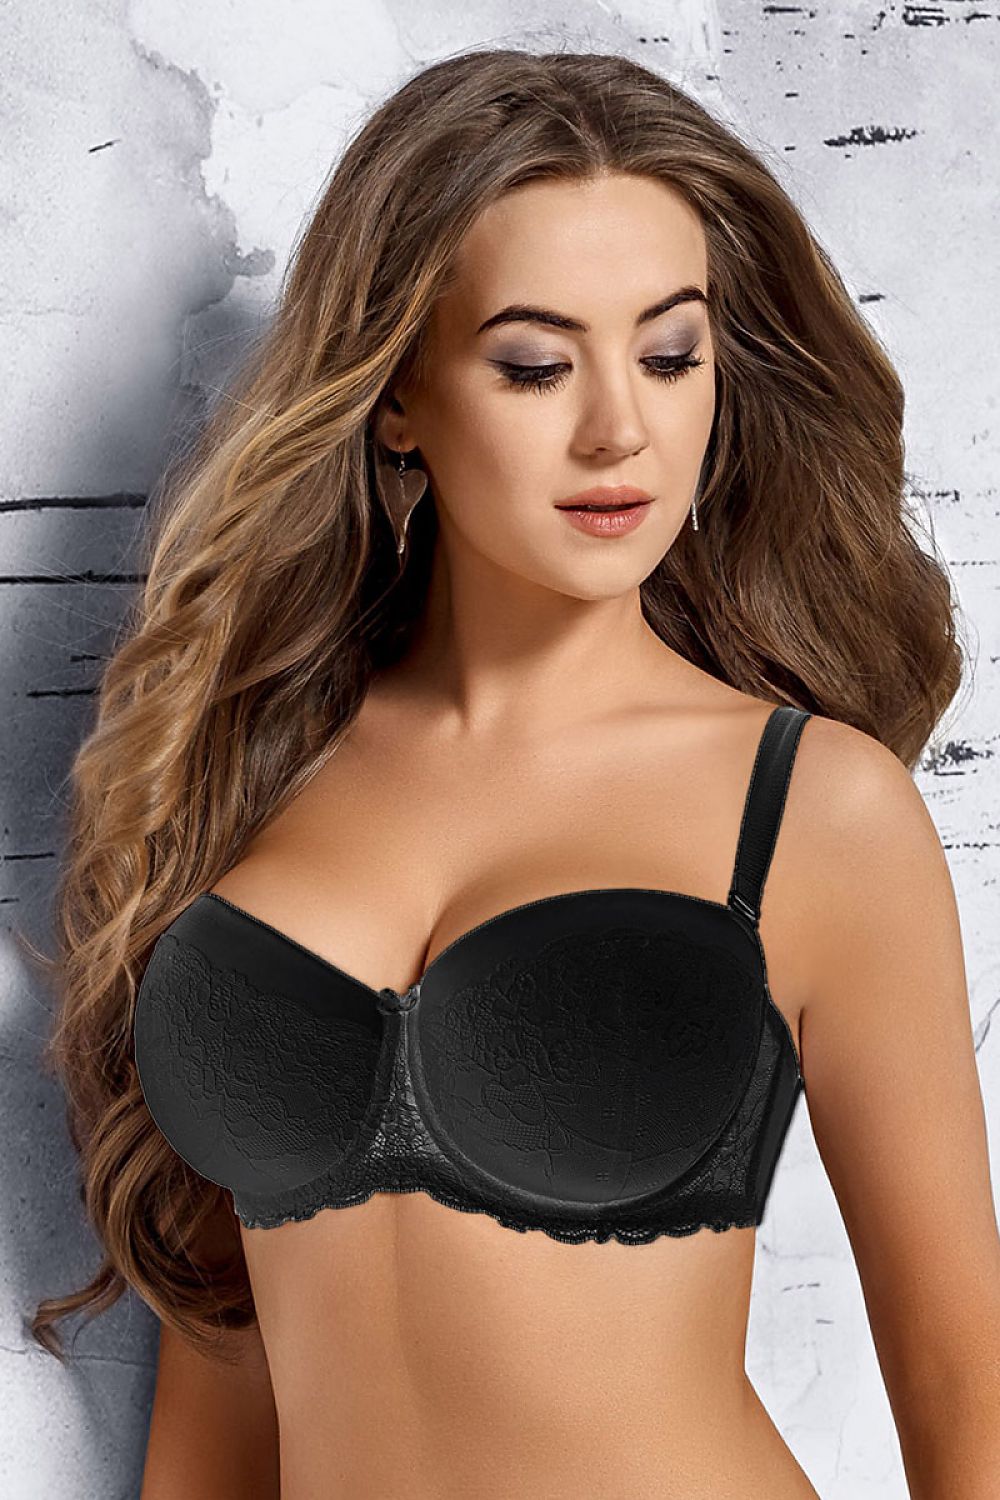 Wholesale strapless bra models in lingerie photos For An